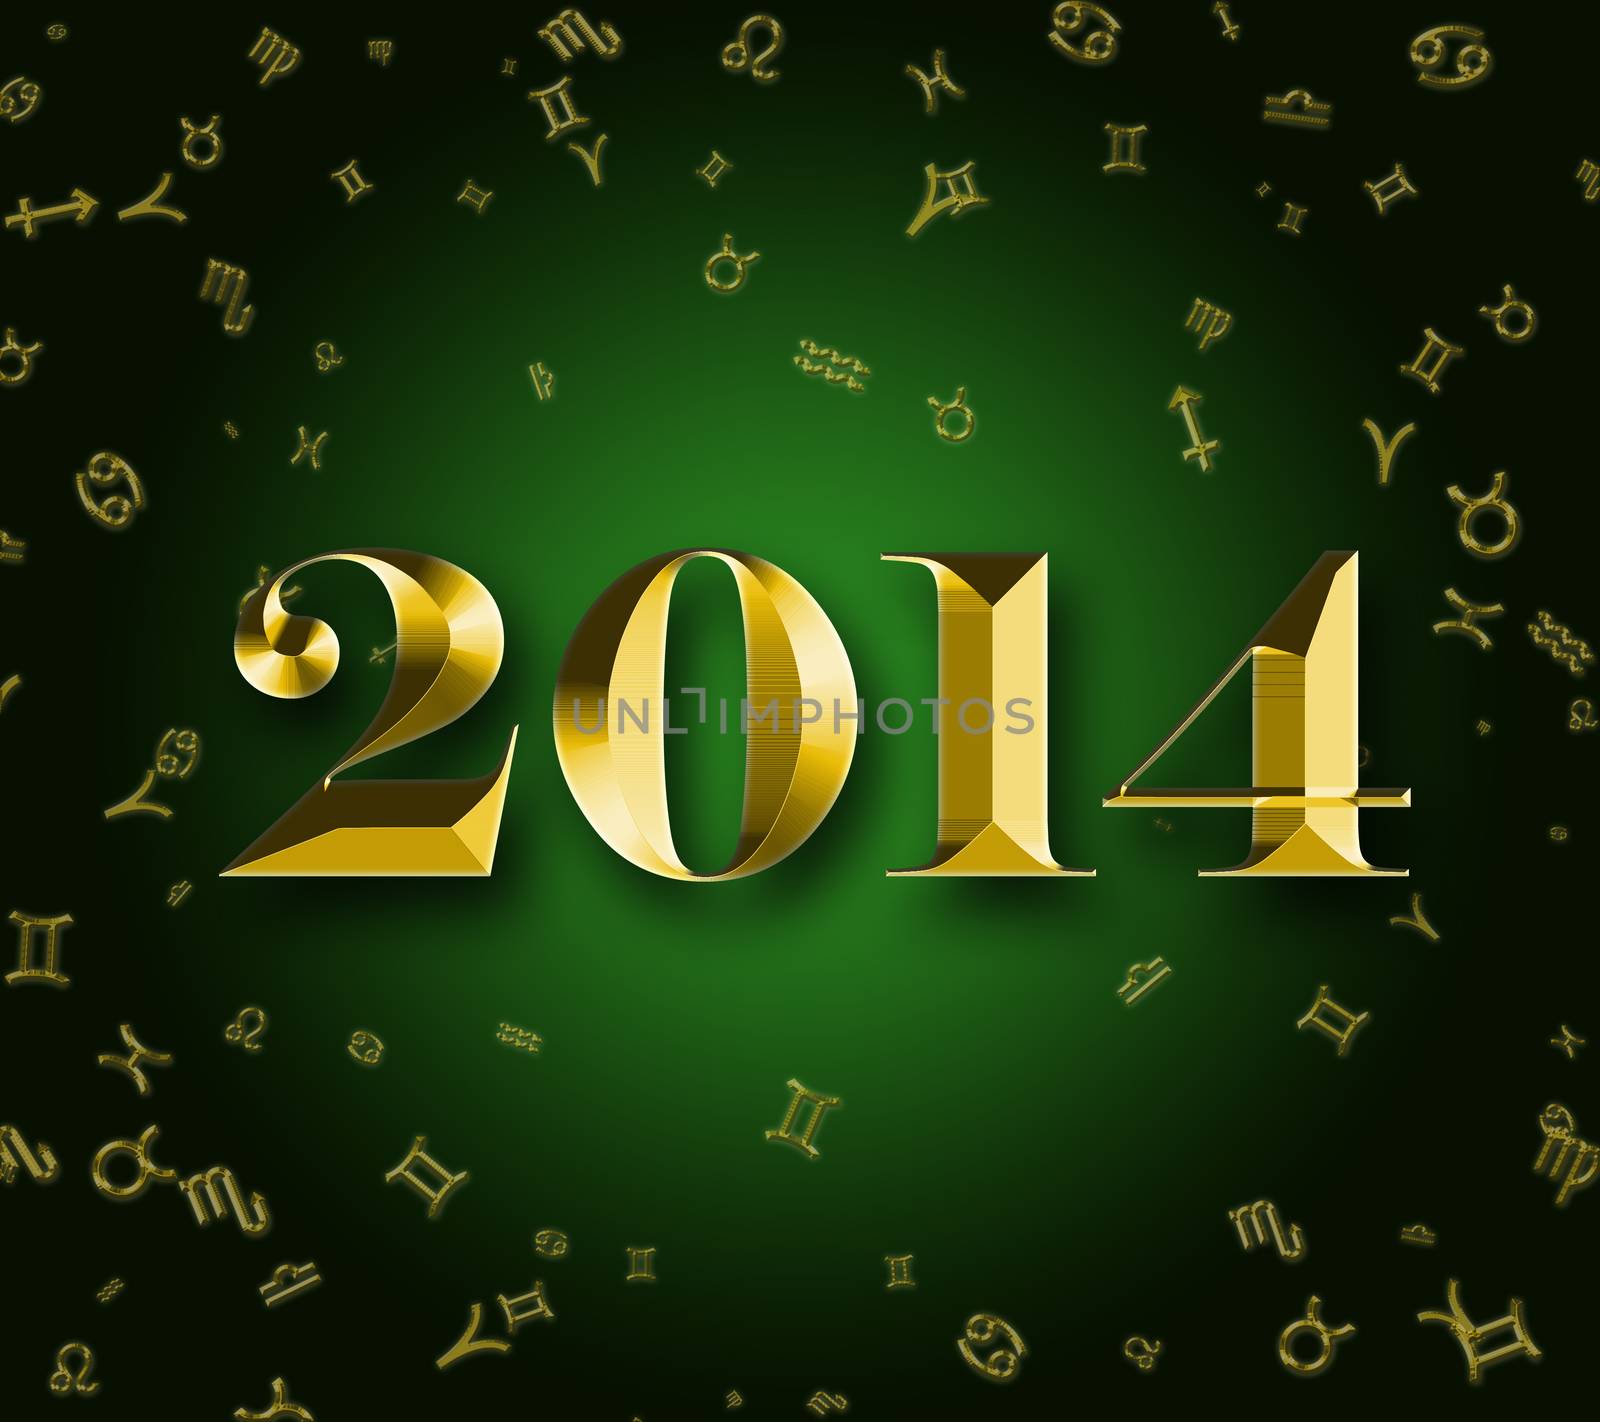 golden 2014 and astrology signs in dark green background by Dddaca